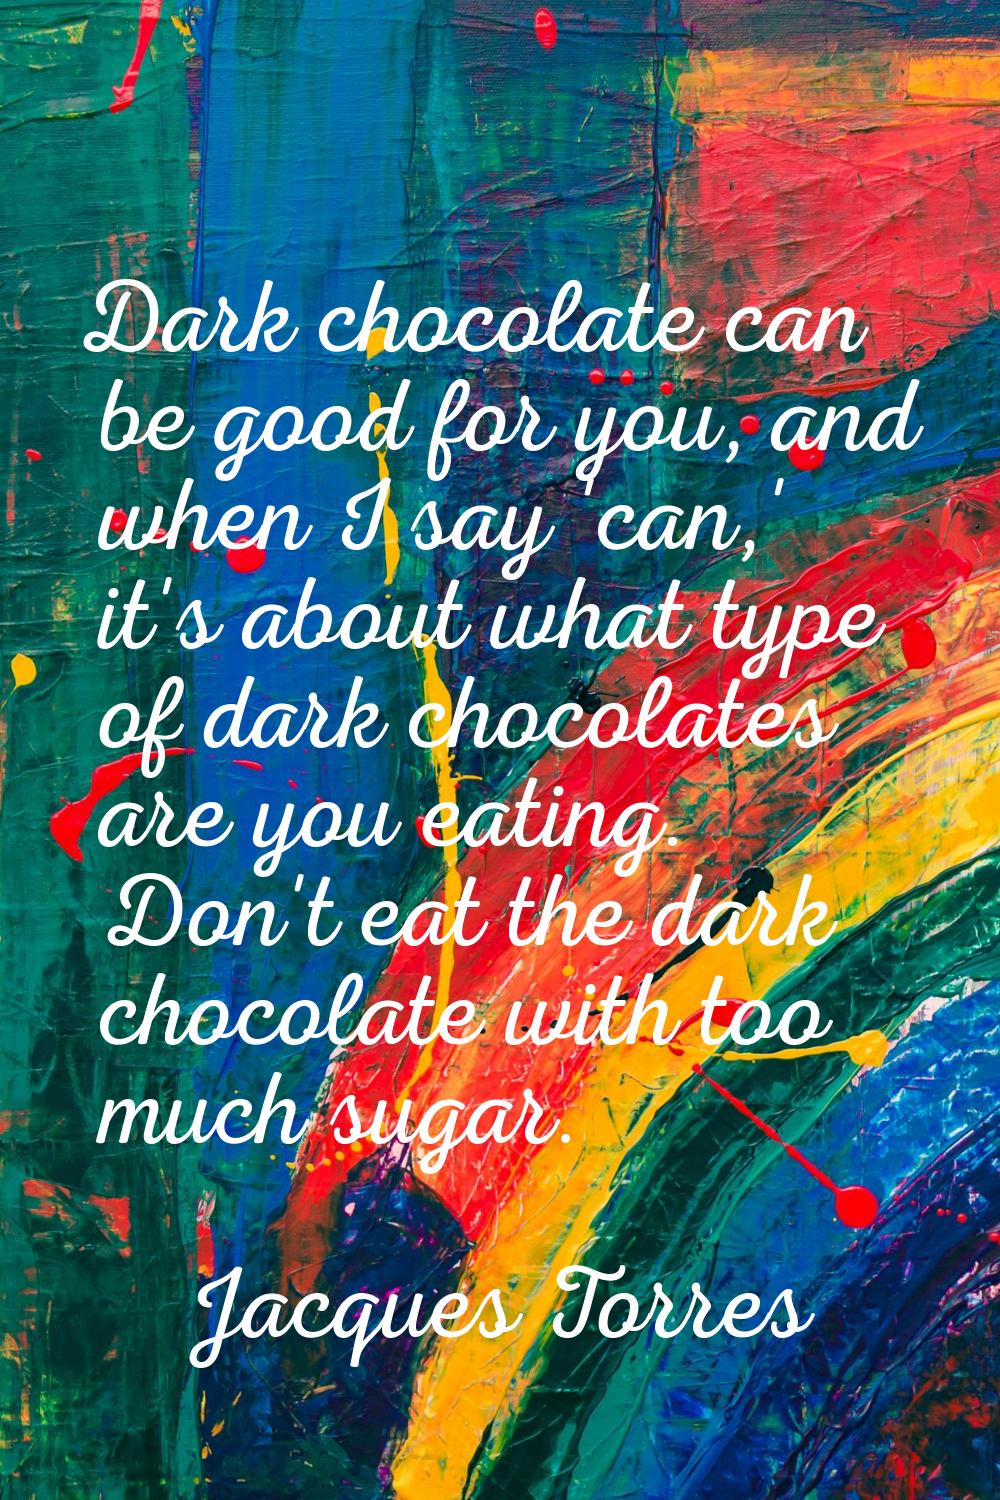 Dark chocolate can be good for you, and when I say 'can,' it's about what type of dark chocolates a